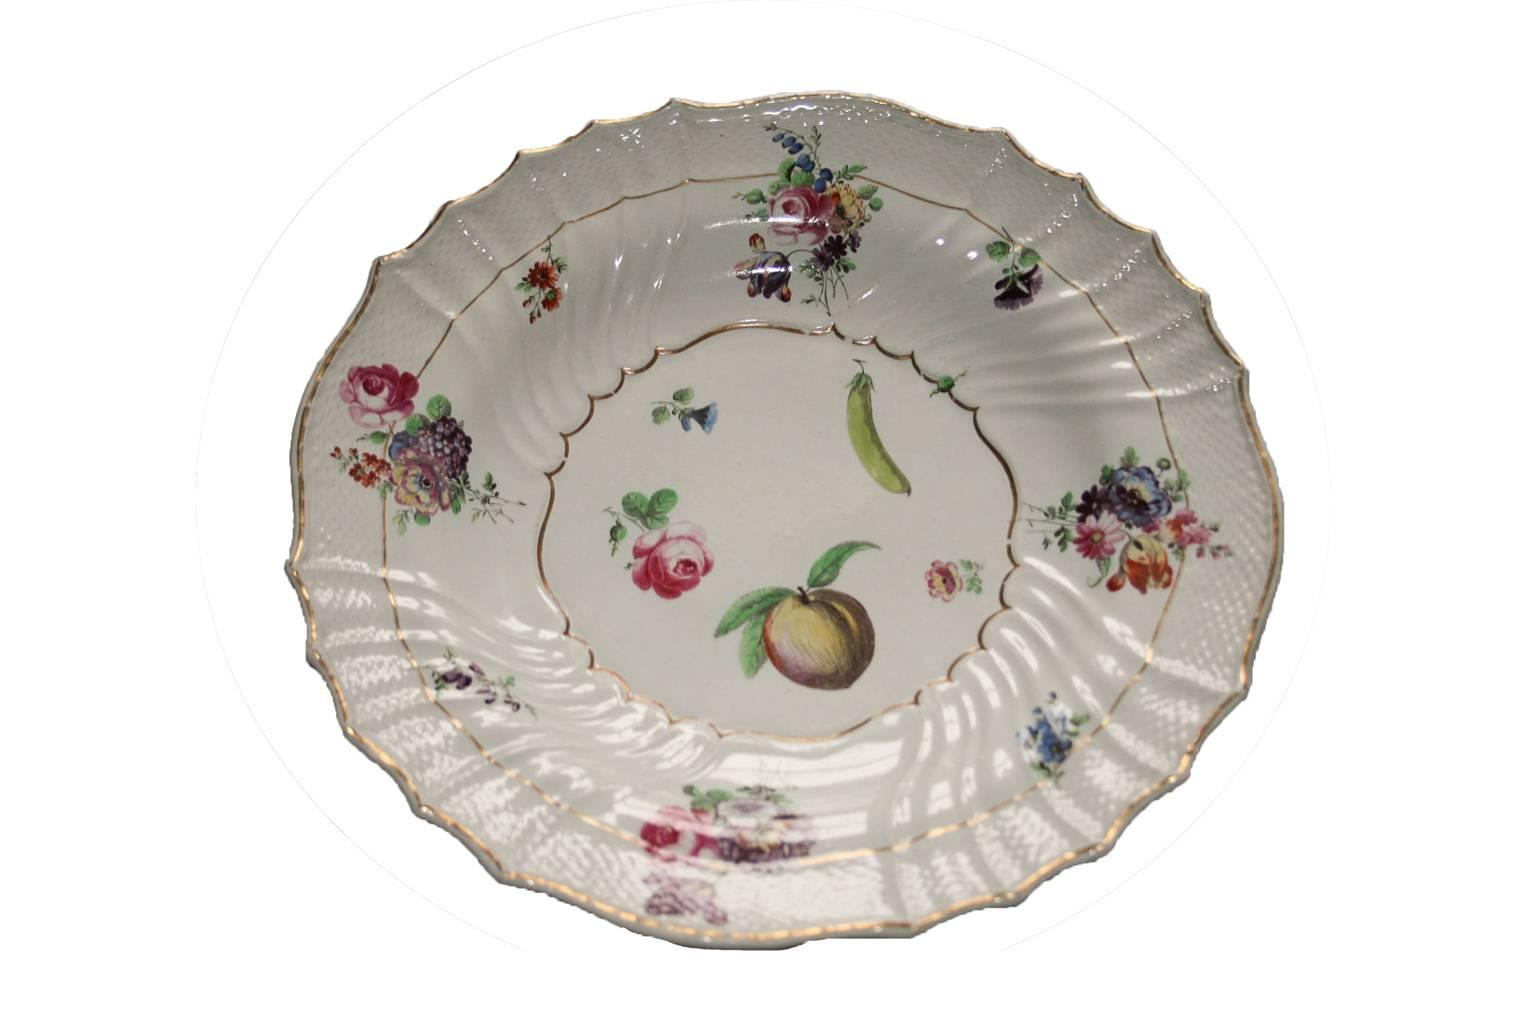 Hand-Crafted Italy Richard Ginori Mid-18th Century Porcelain Set 8 Dishes Floral Design For Sale